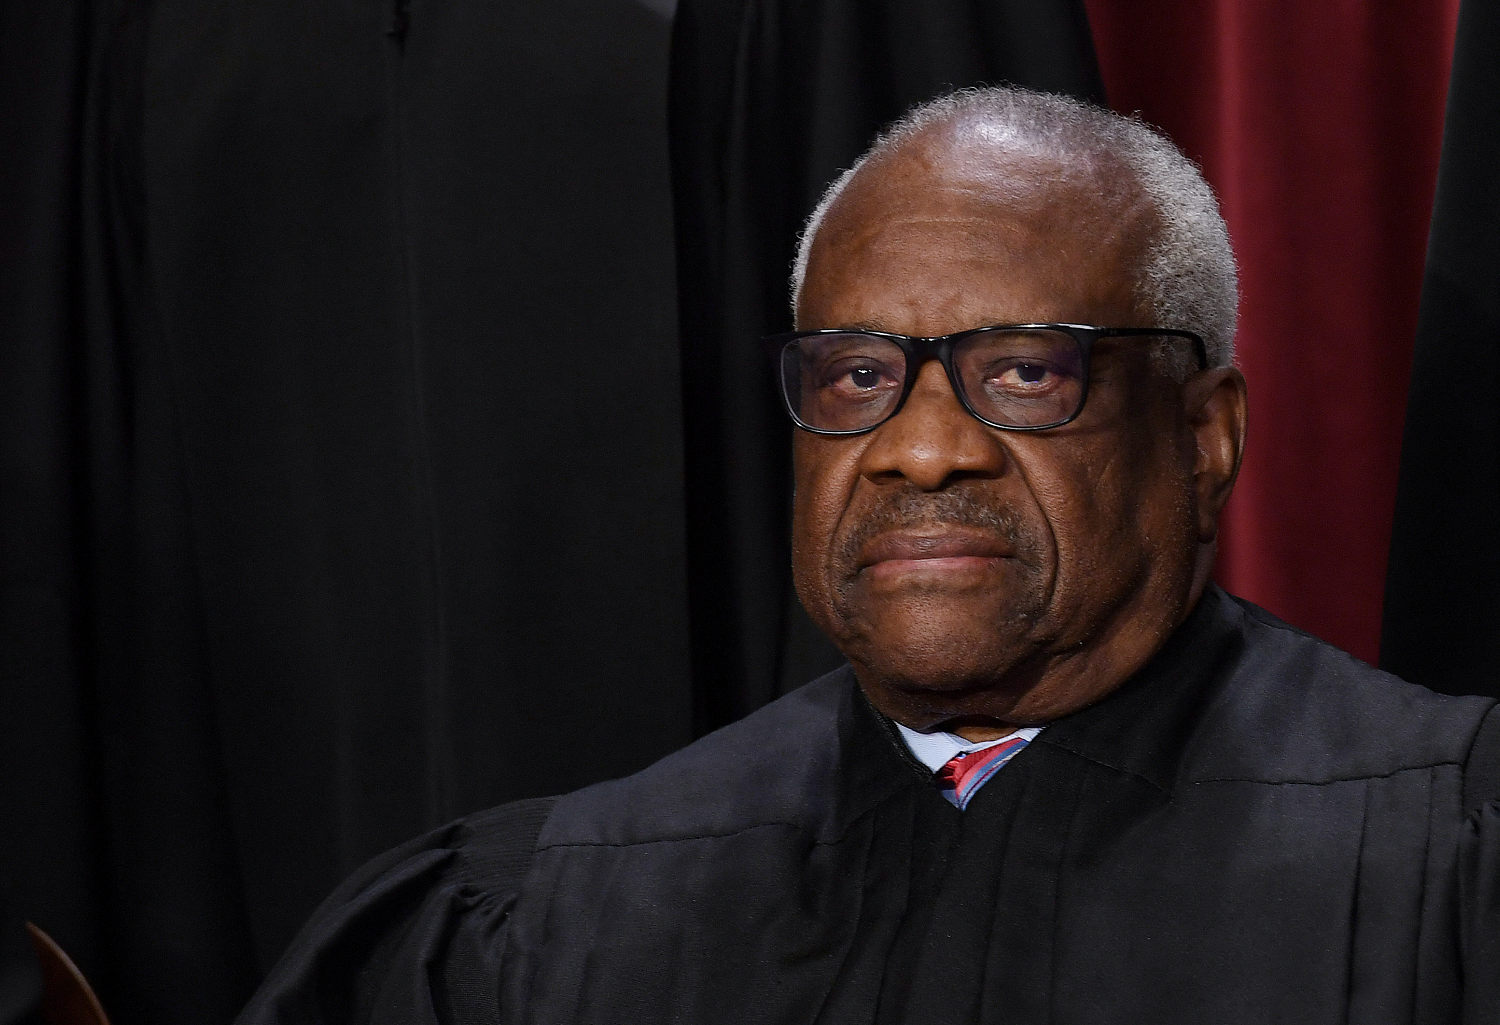 clarence thomas’ next step will test scotus’ ethics code — and democracy itself